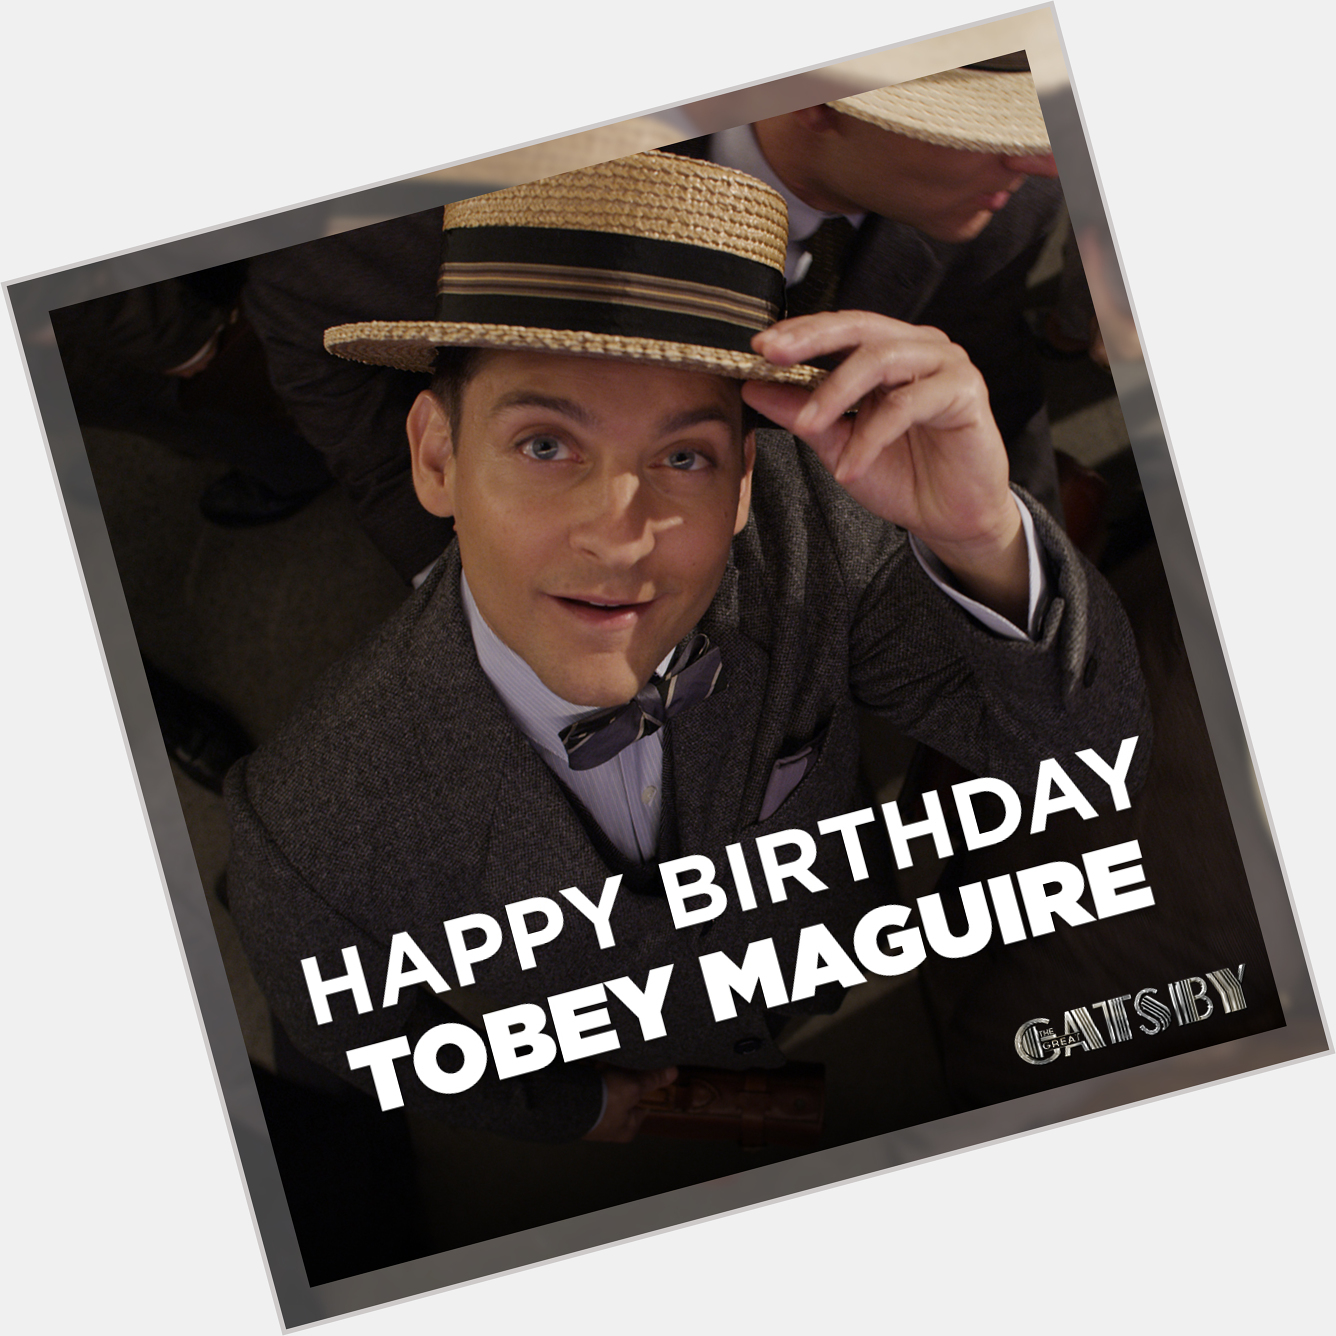 Attention Tobey Maguire fans! Remessage to wish him a happy birthday 